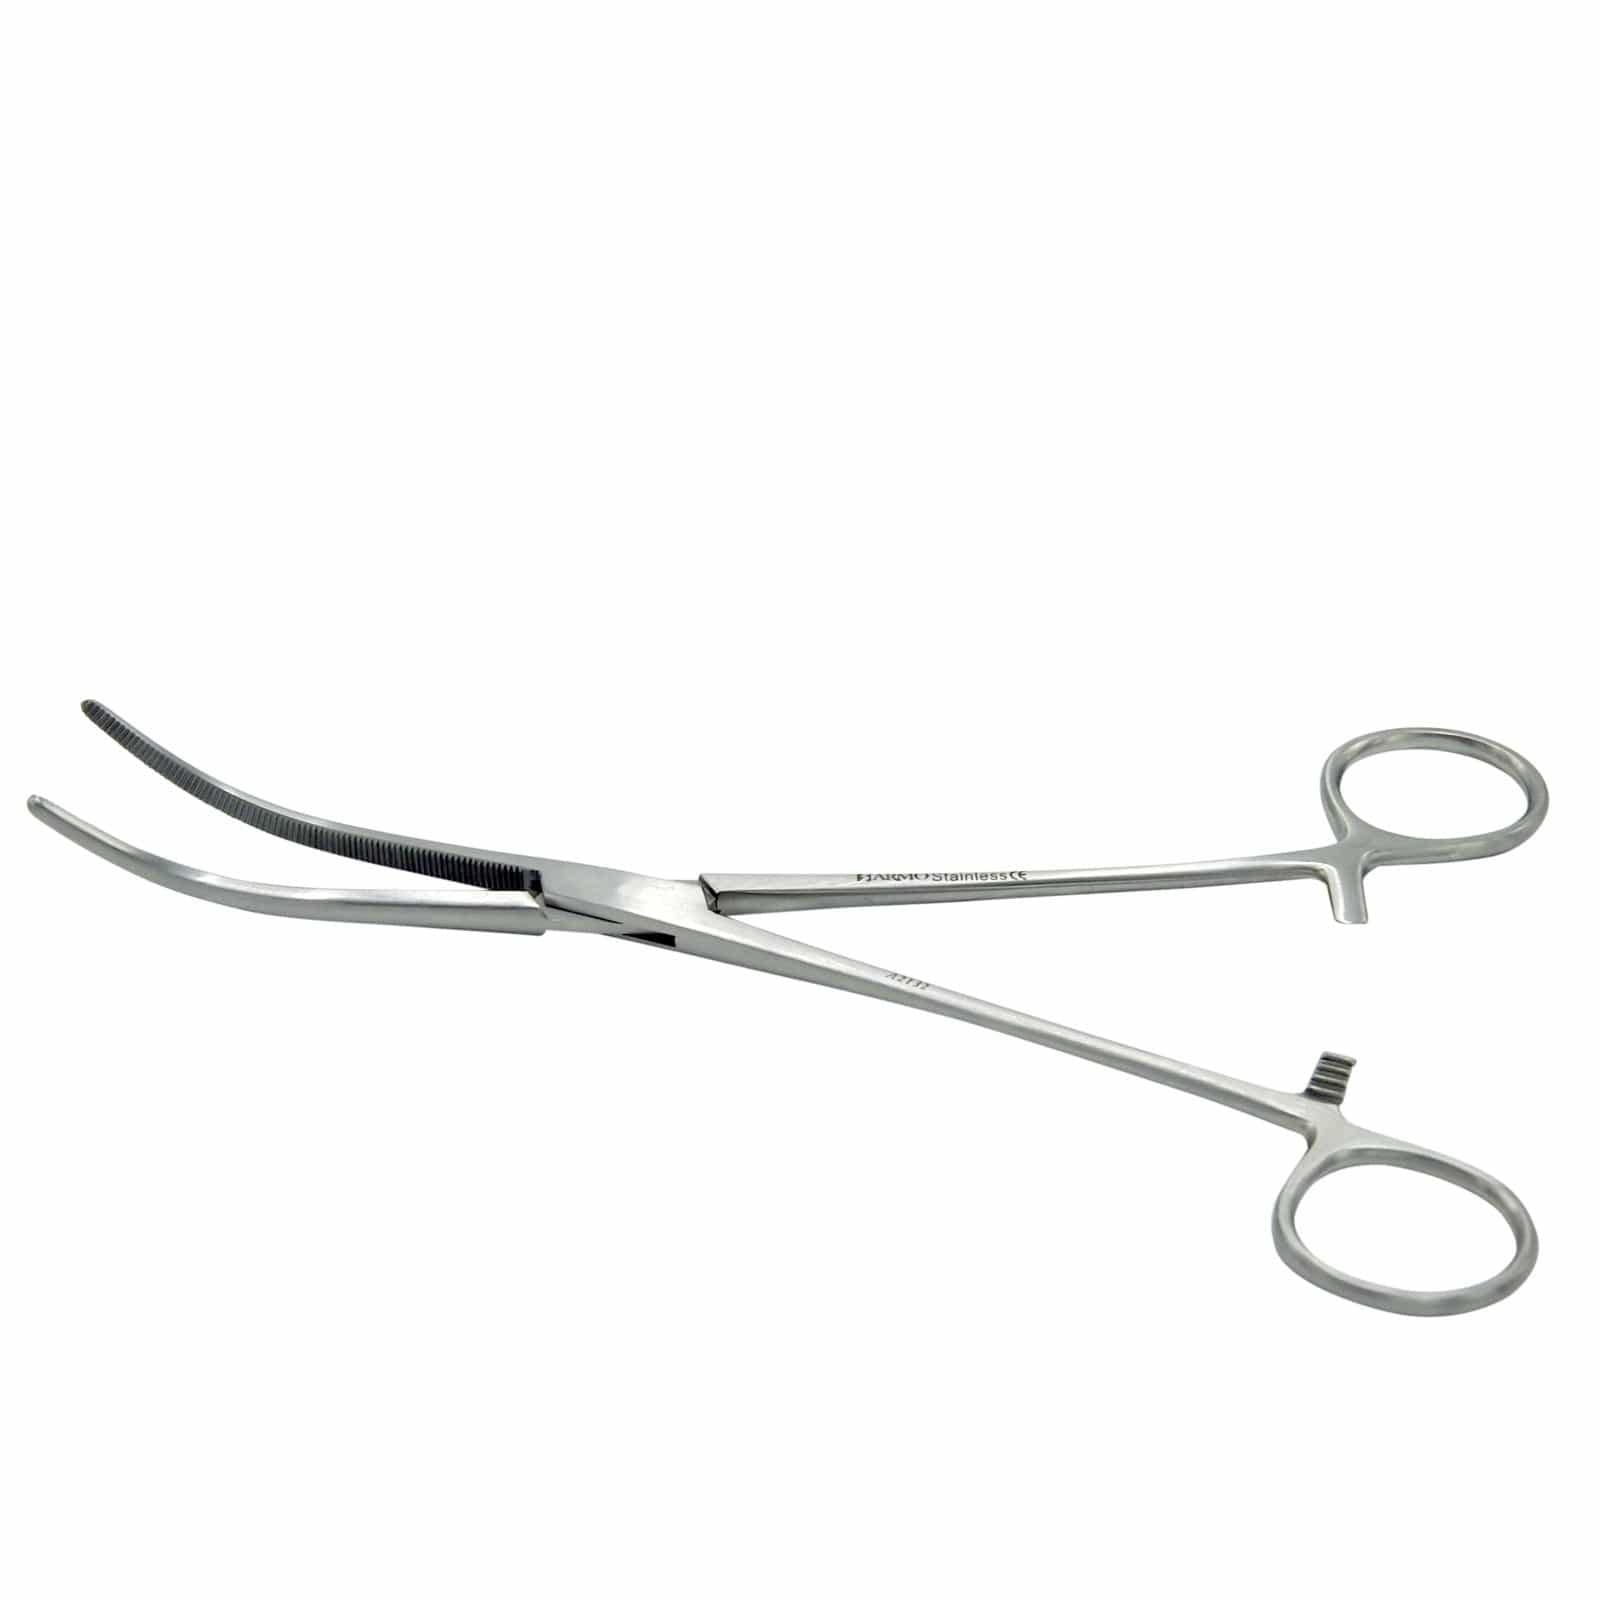 Armo Surgical Instruments 22cm / Curved Armo Pean Rochester Artery Forcep